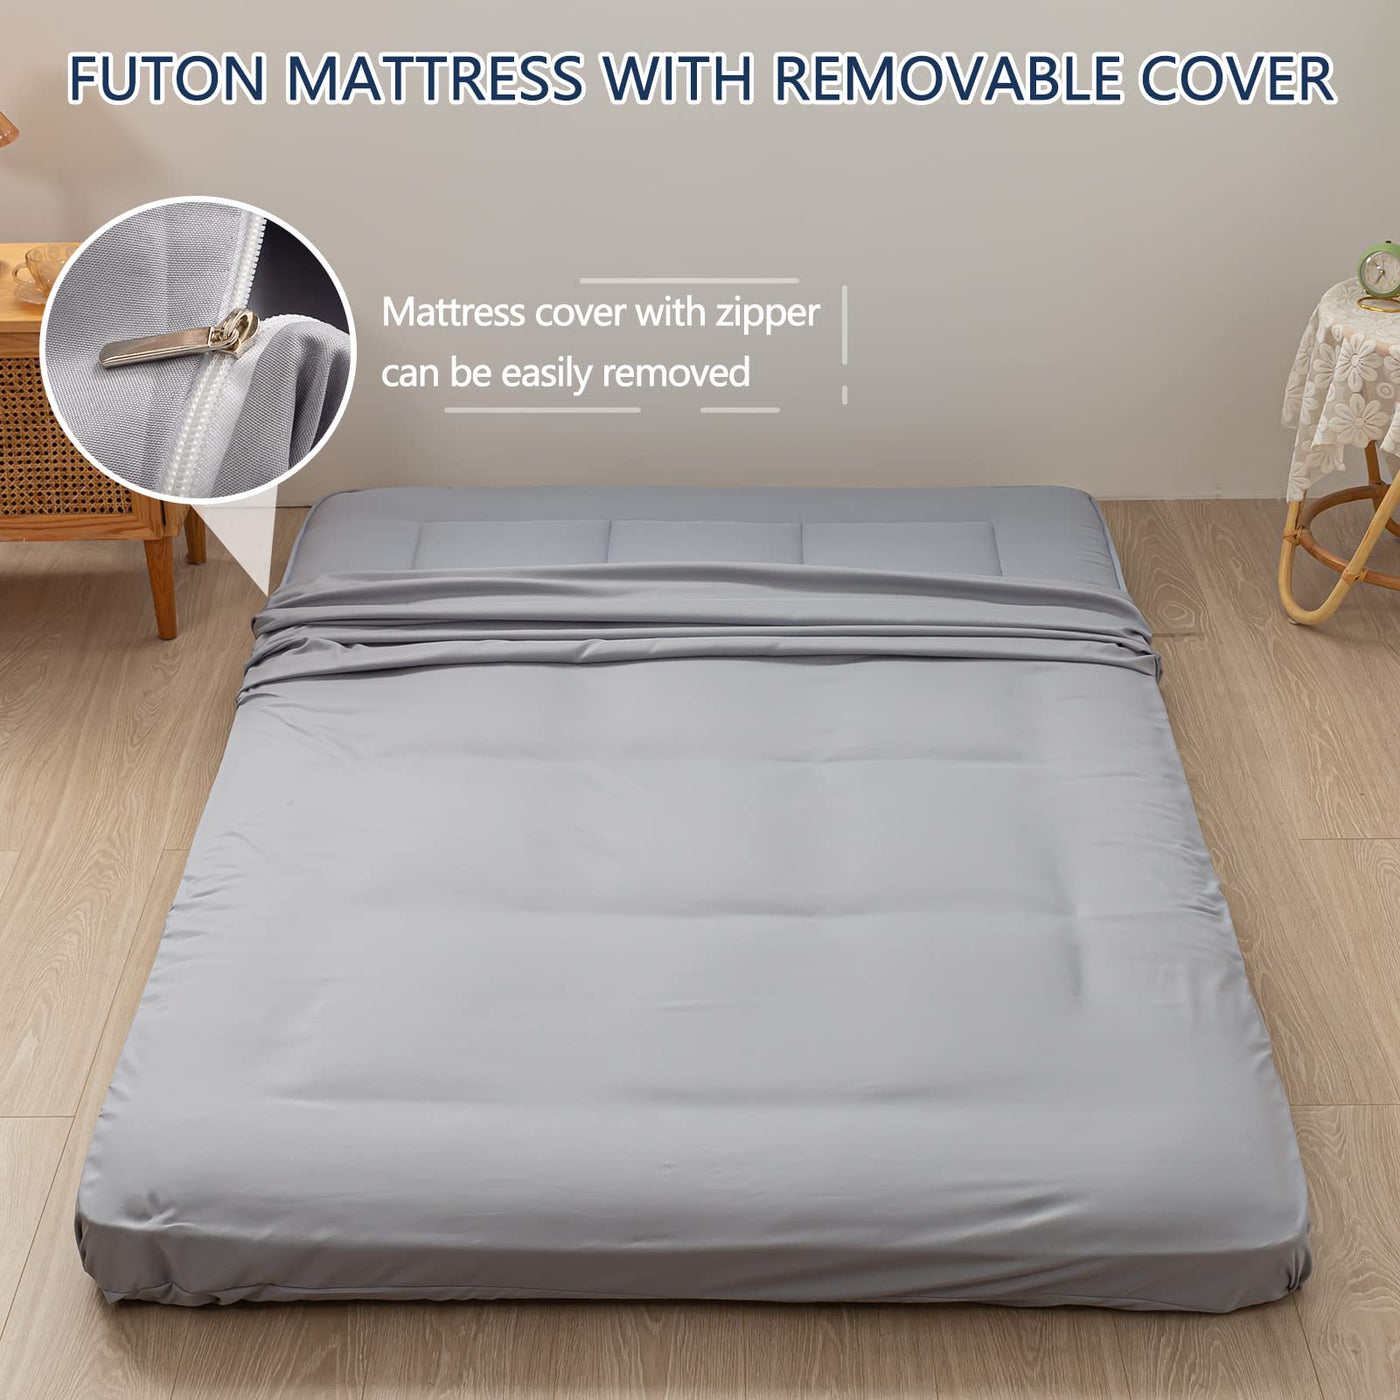 MAXYOYO Japanese Floor Mattress for Adults, 4" Thick Roll Up Floor Bed Futon Mattress Shikibuton, Grey